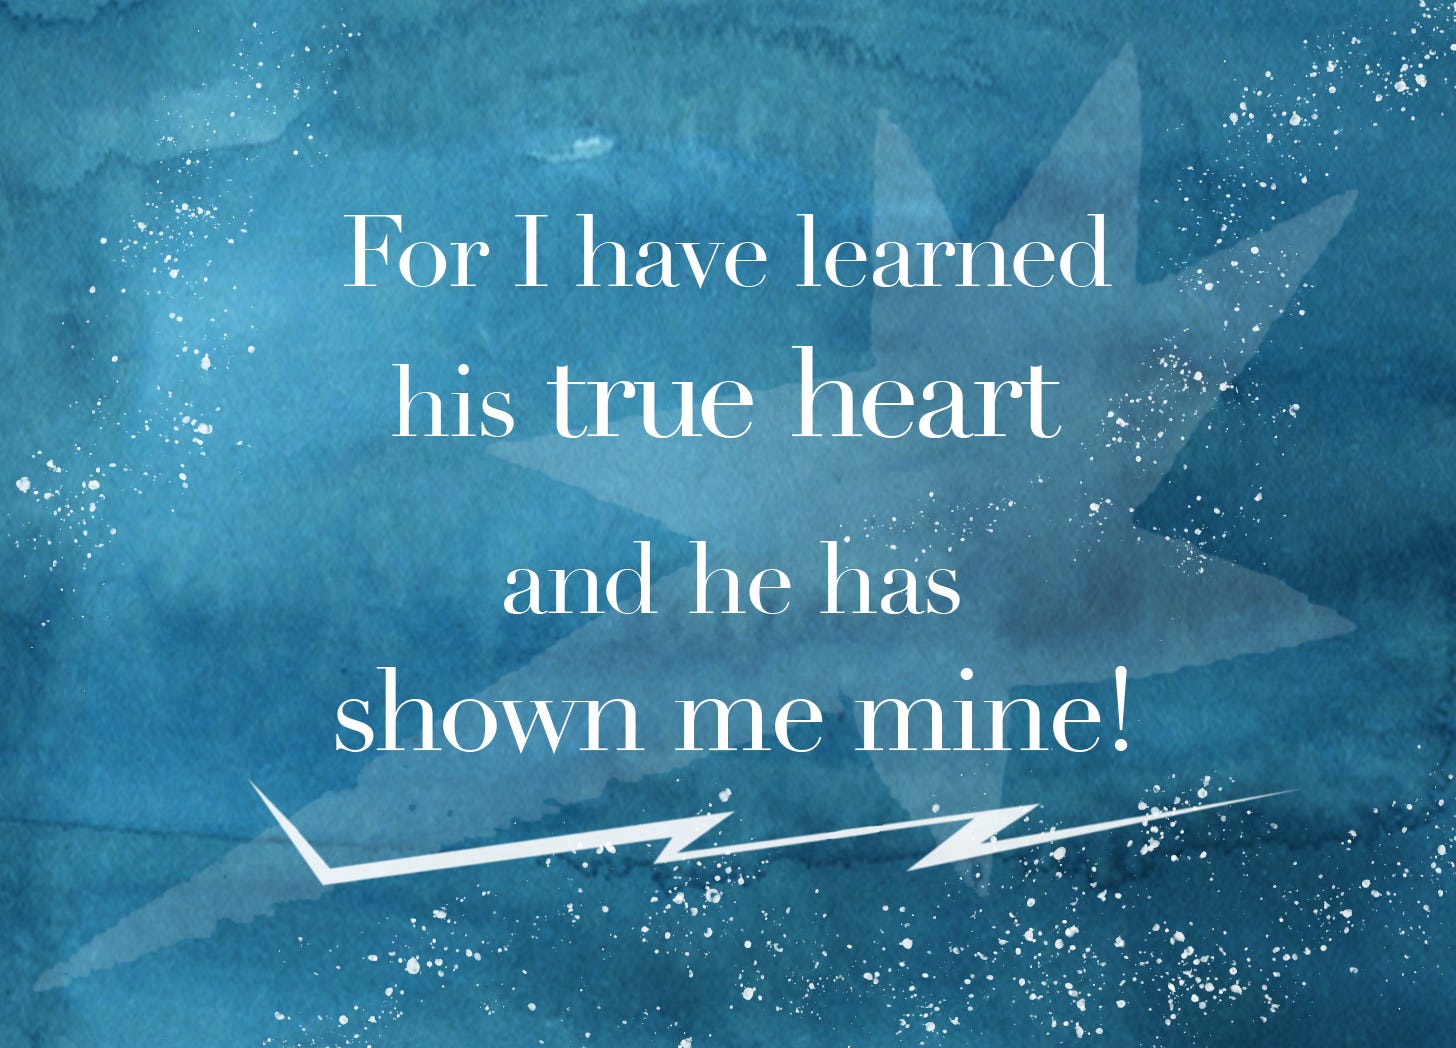 For I have learned his true heart and he has shown me mine!